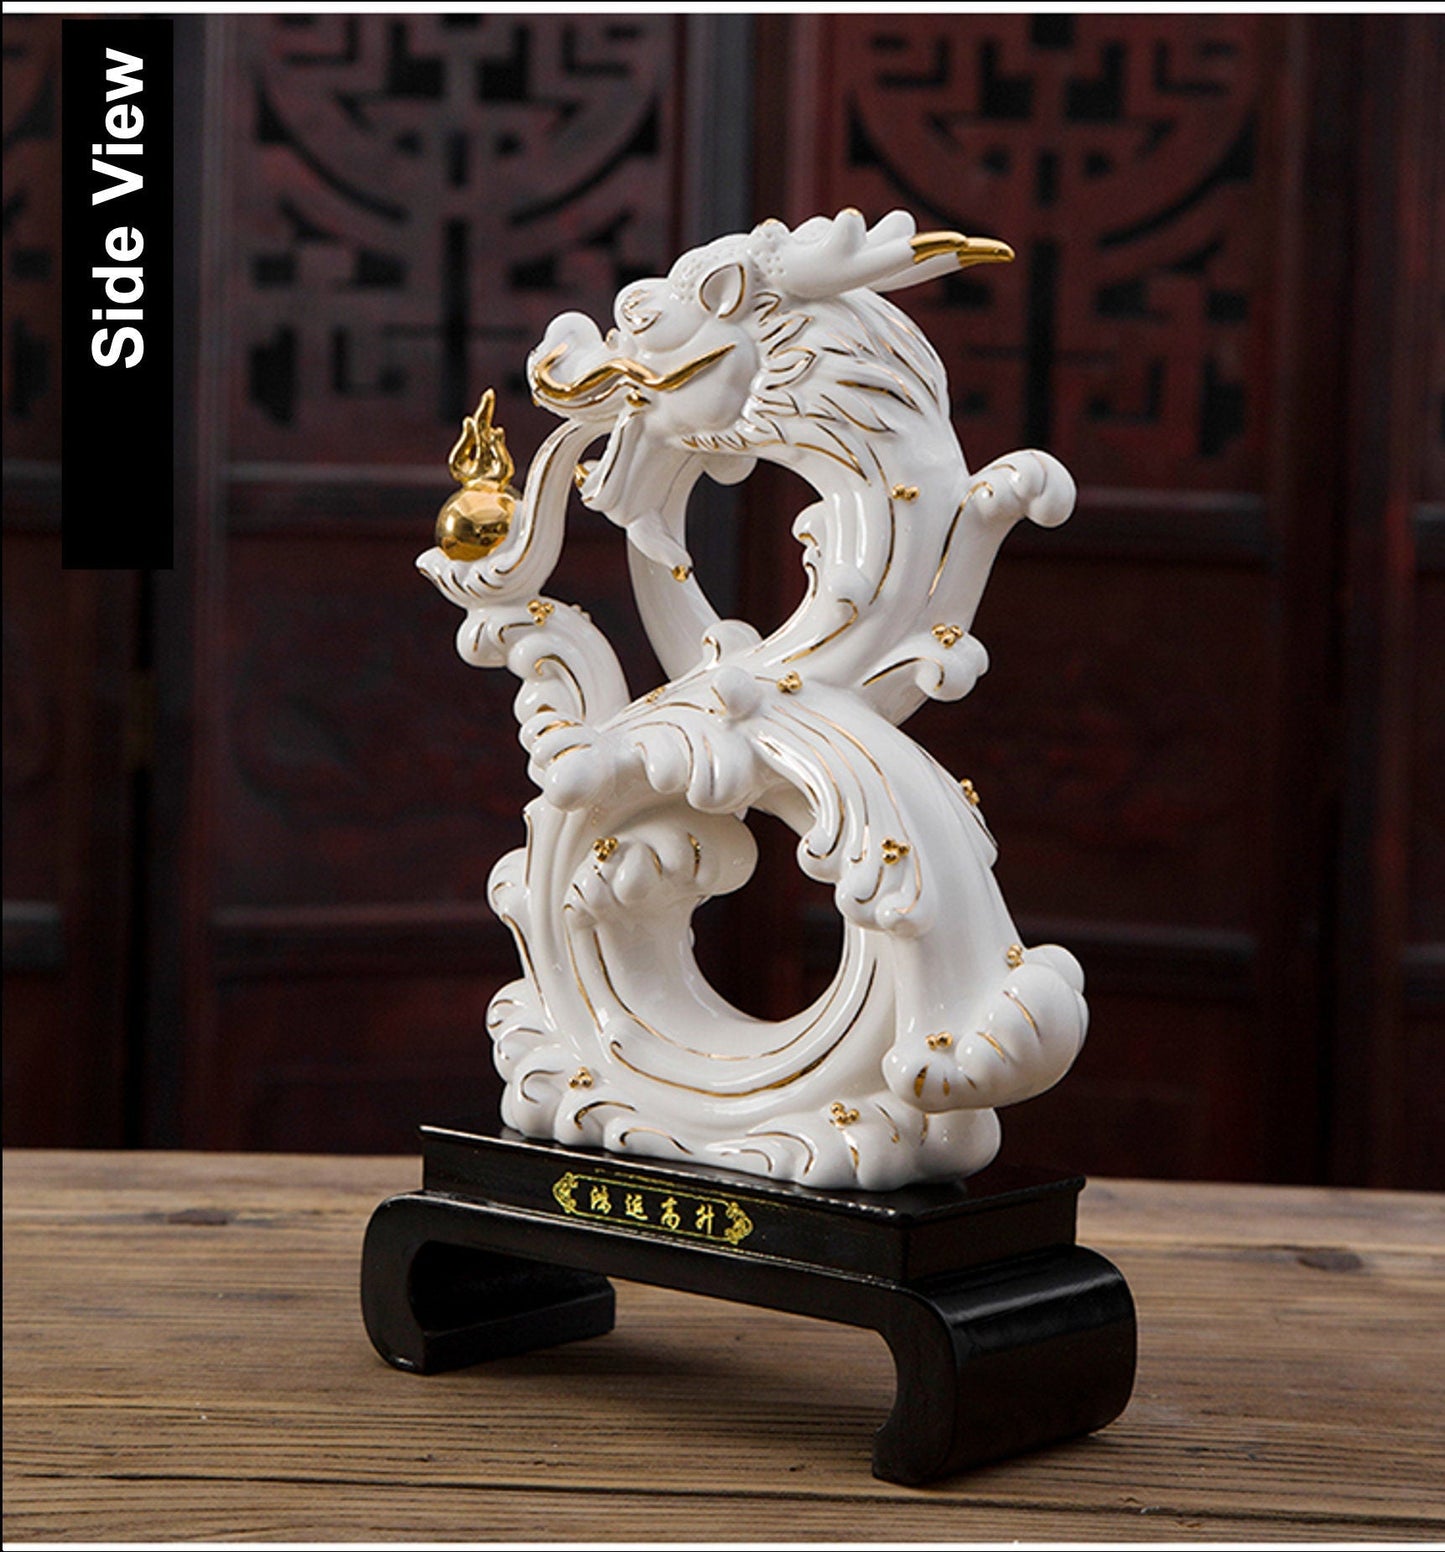 Ceramic Dragon Sculpture & Statue | Fengshui | Good Fortune and Prosperity | Home Decor | White and Red Color Figurines